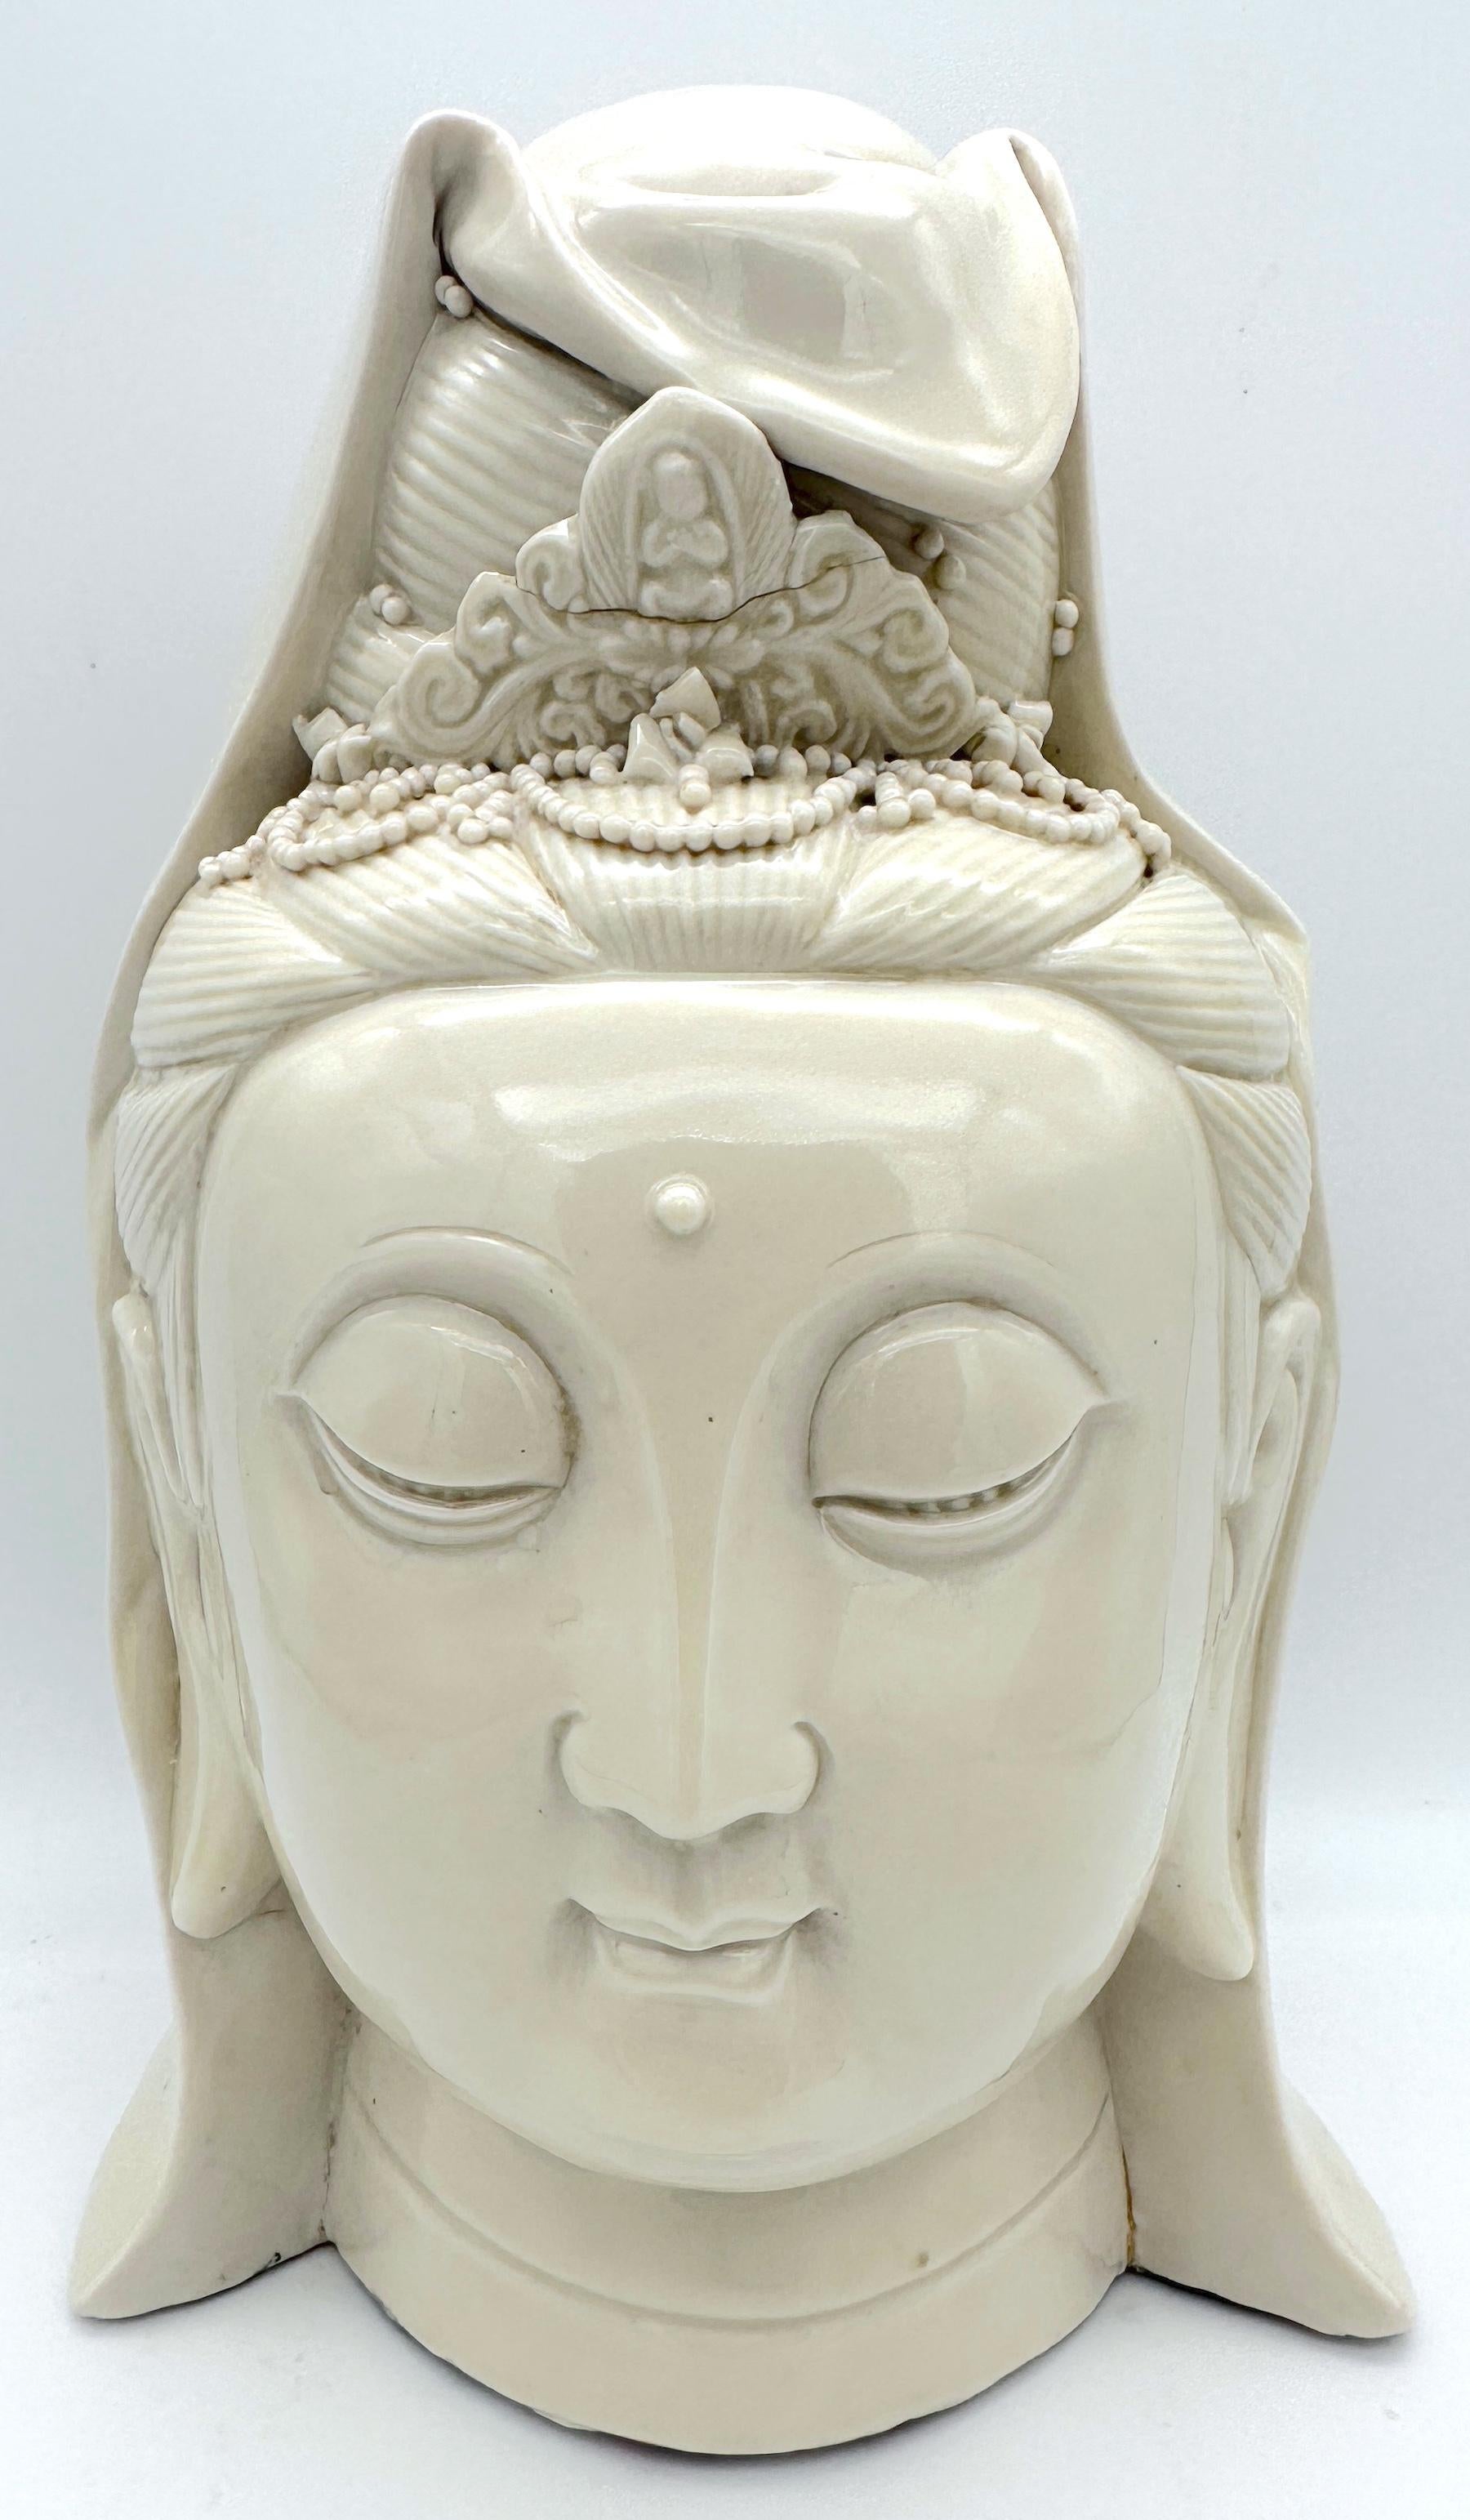 Chinese Blanc De Chine Head of Buddha
China 20th Century

A fine Chinese Blanc De Chine Head of Buddha from the 20th century. This finely made piece stands at 10 inches in height, showcasing a highly detailed portrait bust of Buddha. The serene